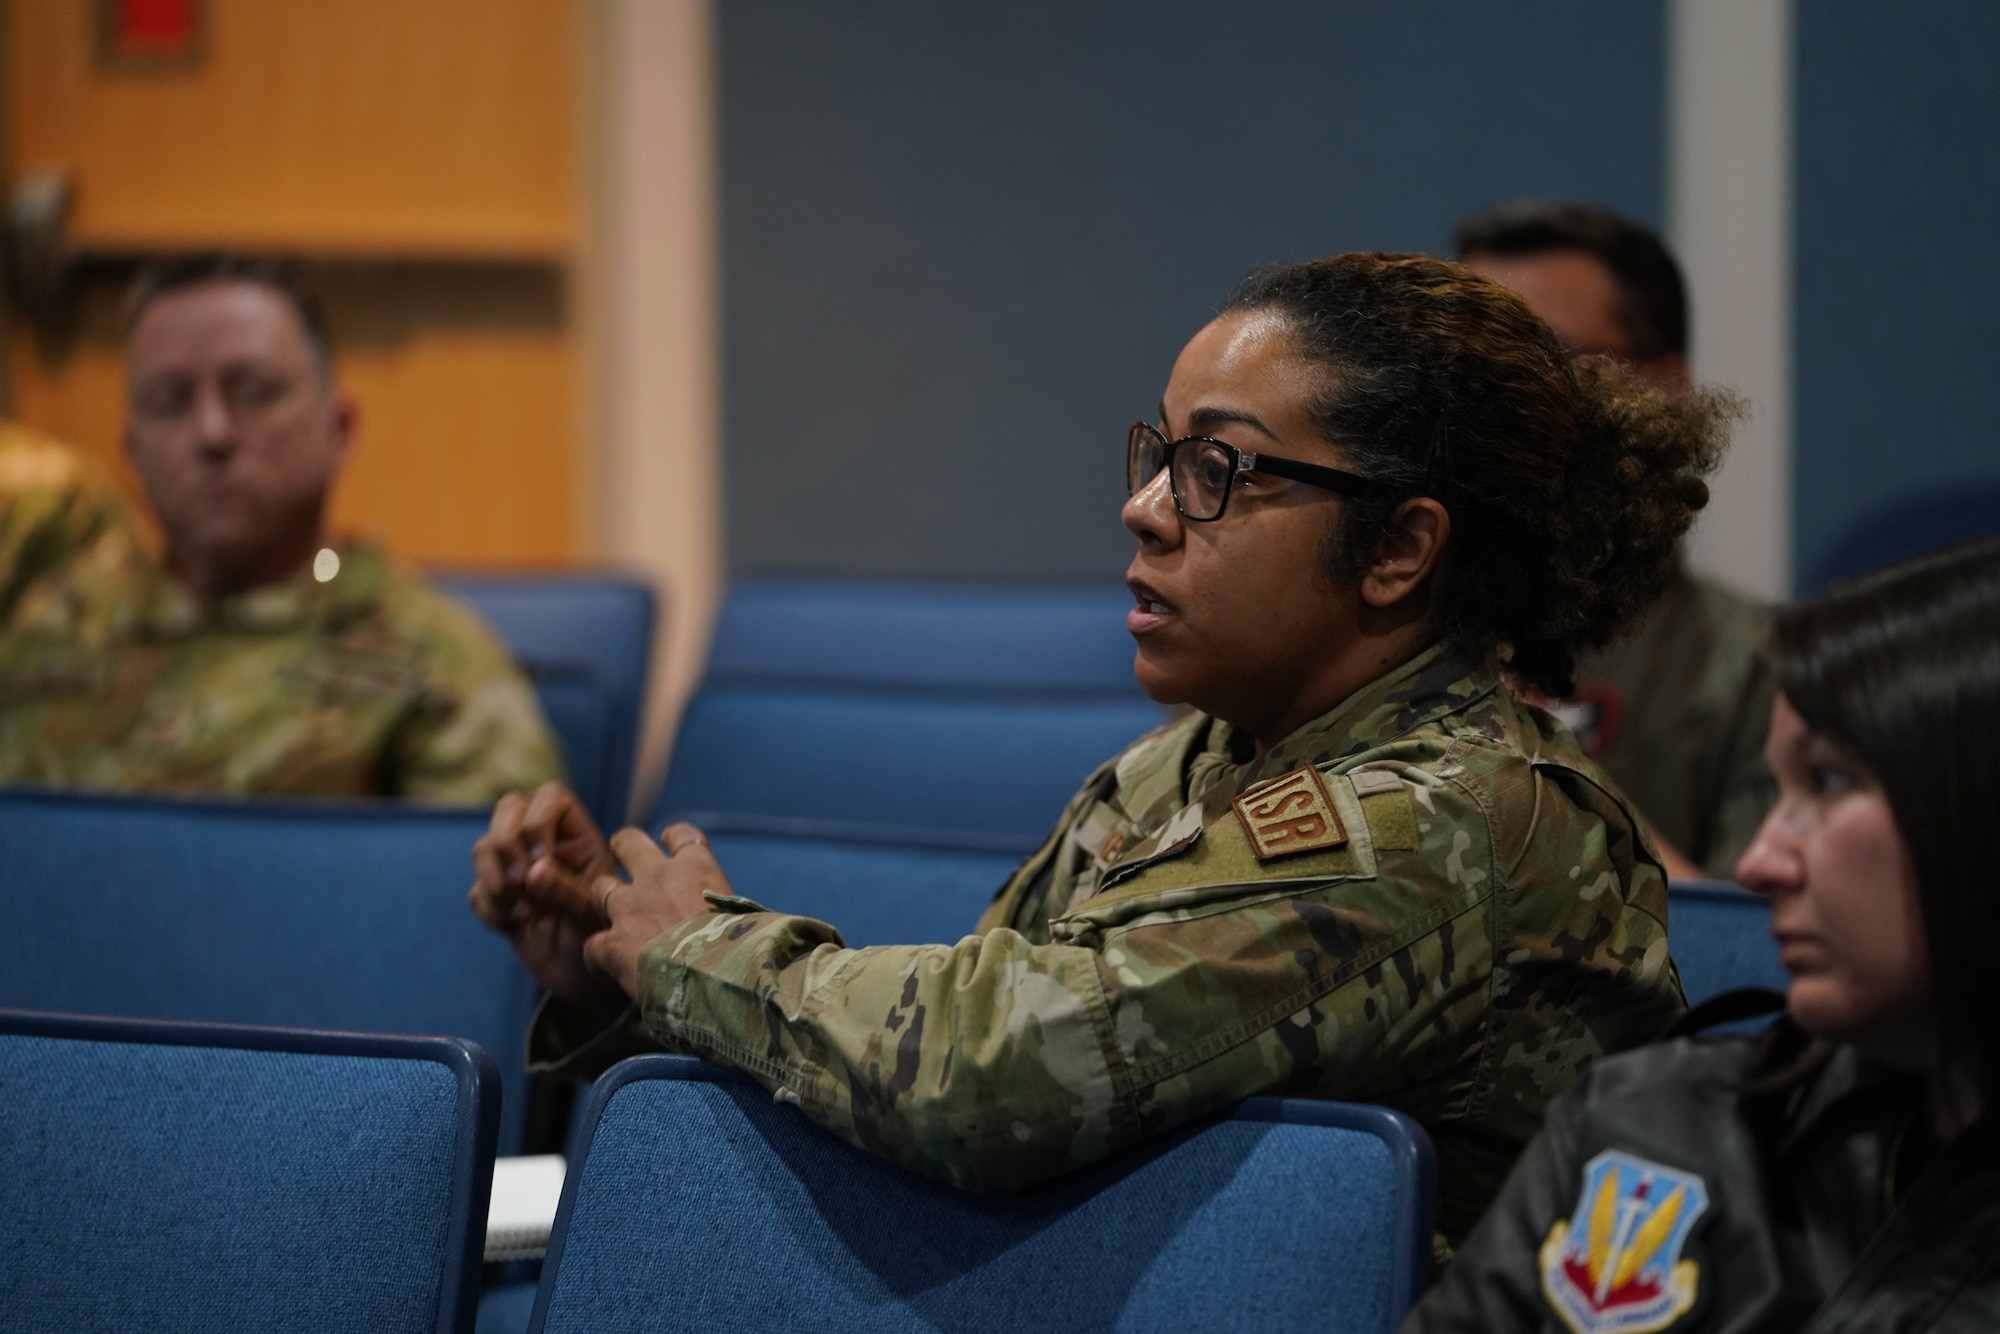 A U.S. Air Force Airman, assigned to the 432nd Wing, addresses the audience at the inaugural meeting of the wing's Women's Initiative Team (WIT) chapter at Creech Air Force Base, Nevada, Oct. 26, 2022. The WIT is composed of volunteers dedicated to identifying and eliminating barriers to women’s service in the Department of the Air Force and Department of Defense while building a community of leadership and a network of allies and support agencies. (U.S. Air Force photo by Airman 1st Class Ariel O'Shea)